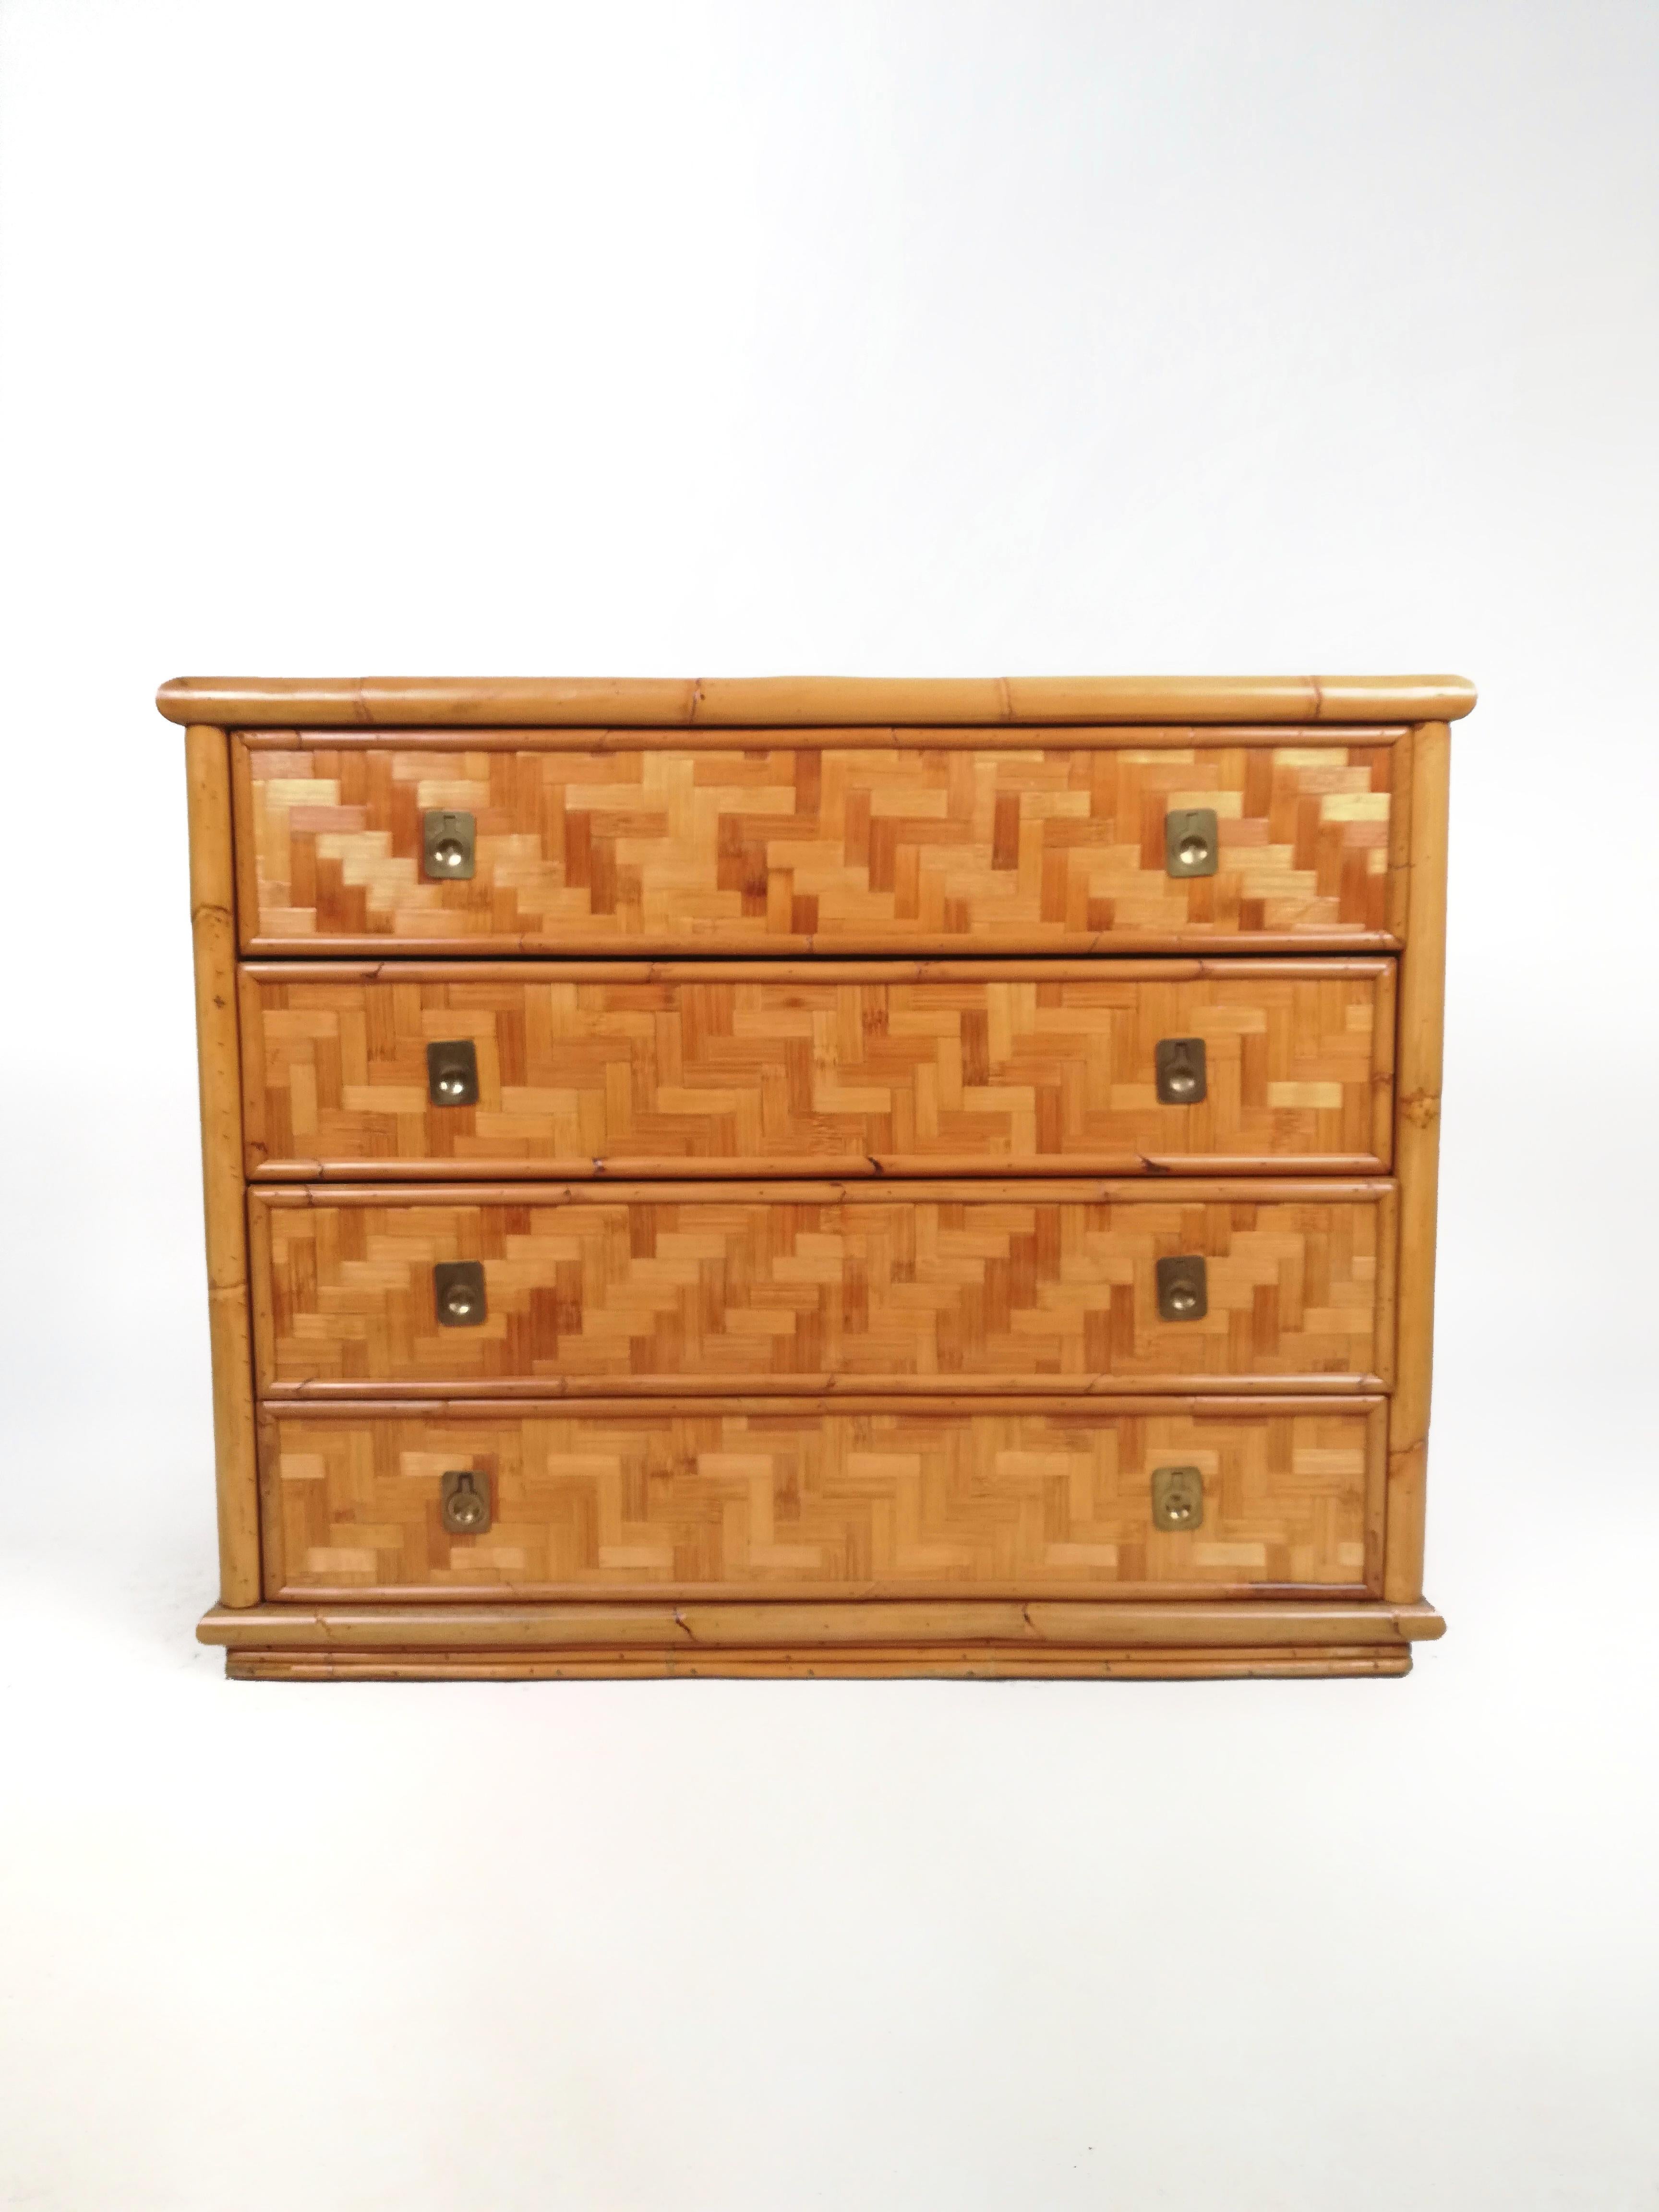 Vintage Chest of Drawers in the Riviera style, made in beech wood and covered by a thick weave of bamboo fiber profiled, solid rush and brass handles.
It was made in Italy and most probably by Dal Vera, between 1960 and 1970.
The chest of drawers